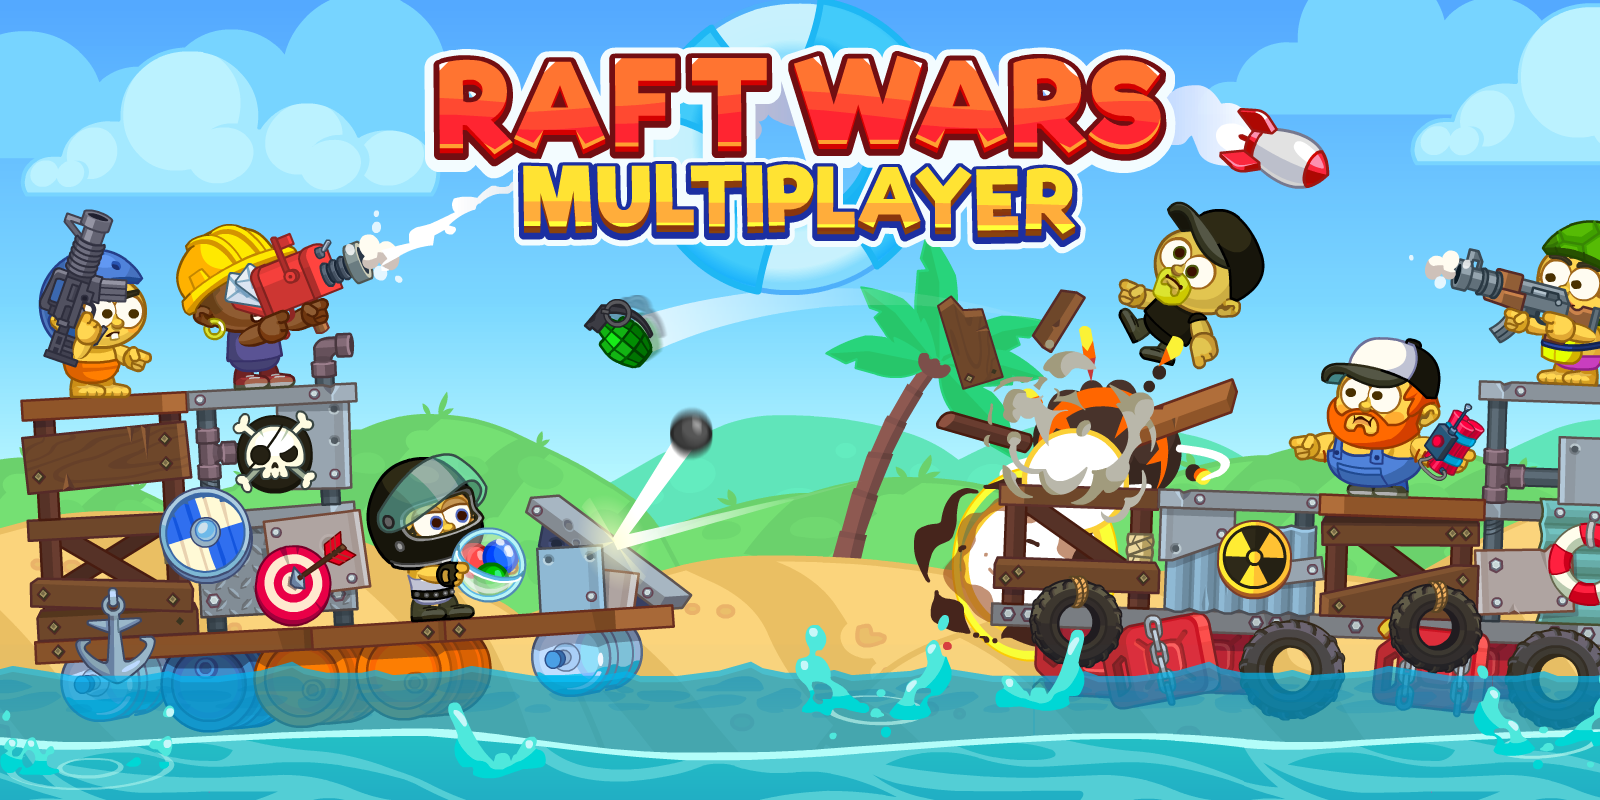 RAFT WARS - Play Online for Free!